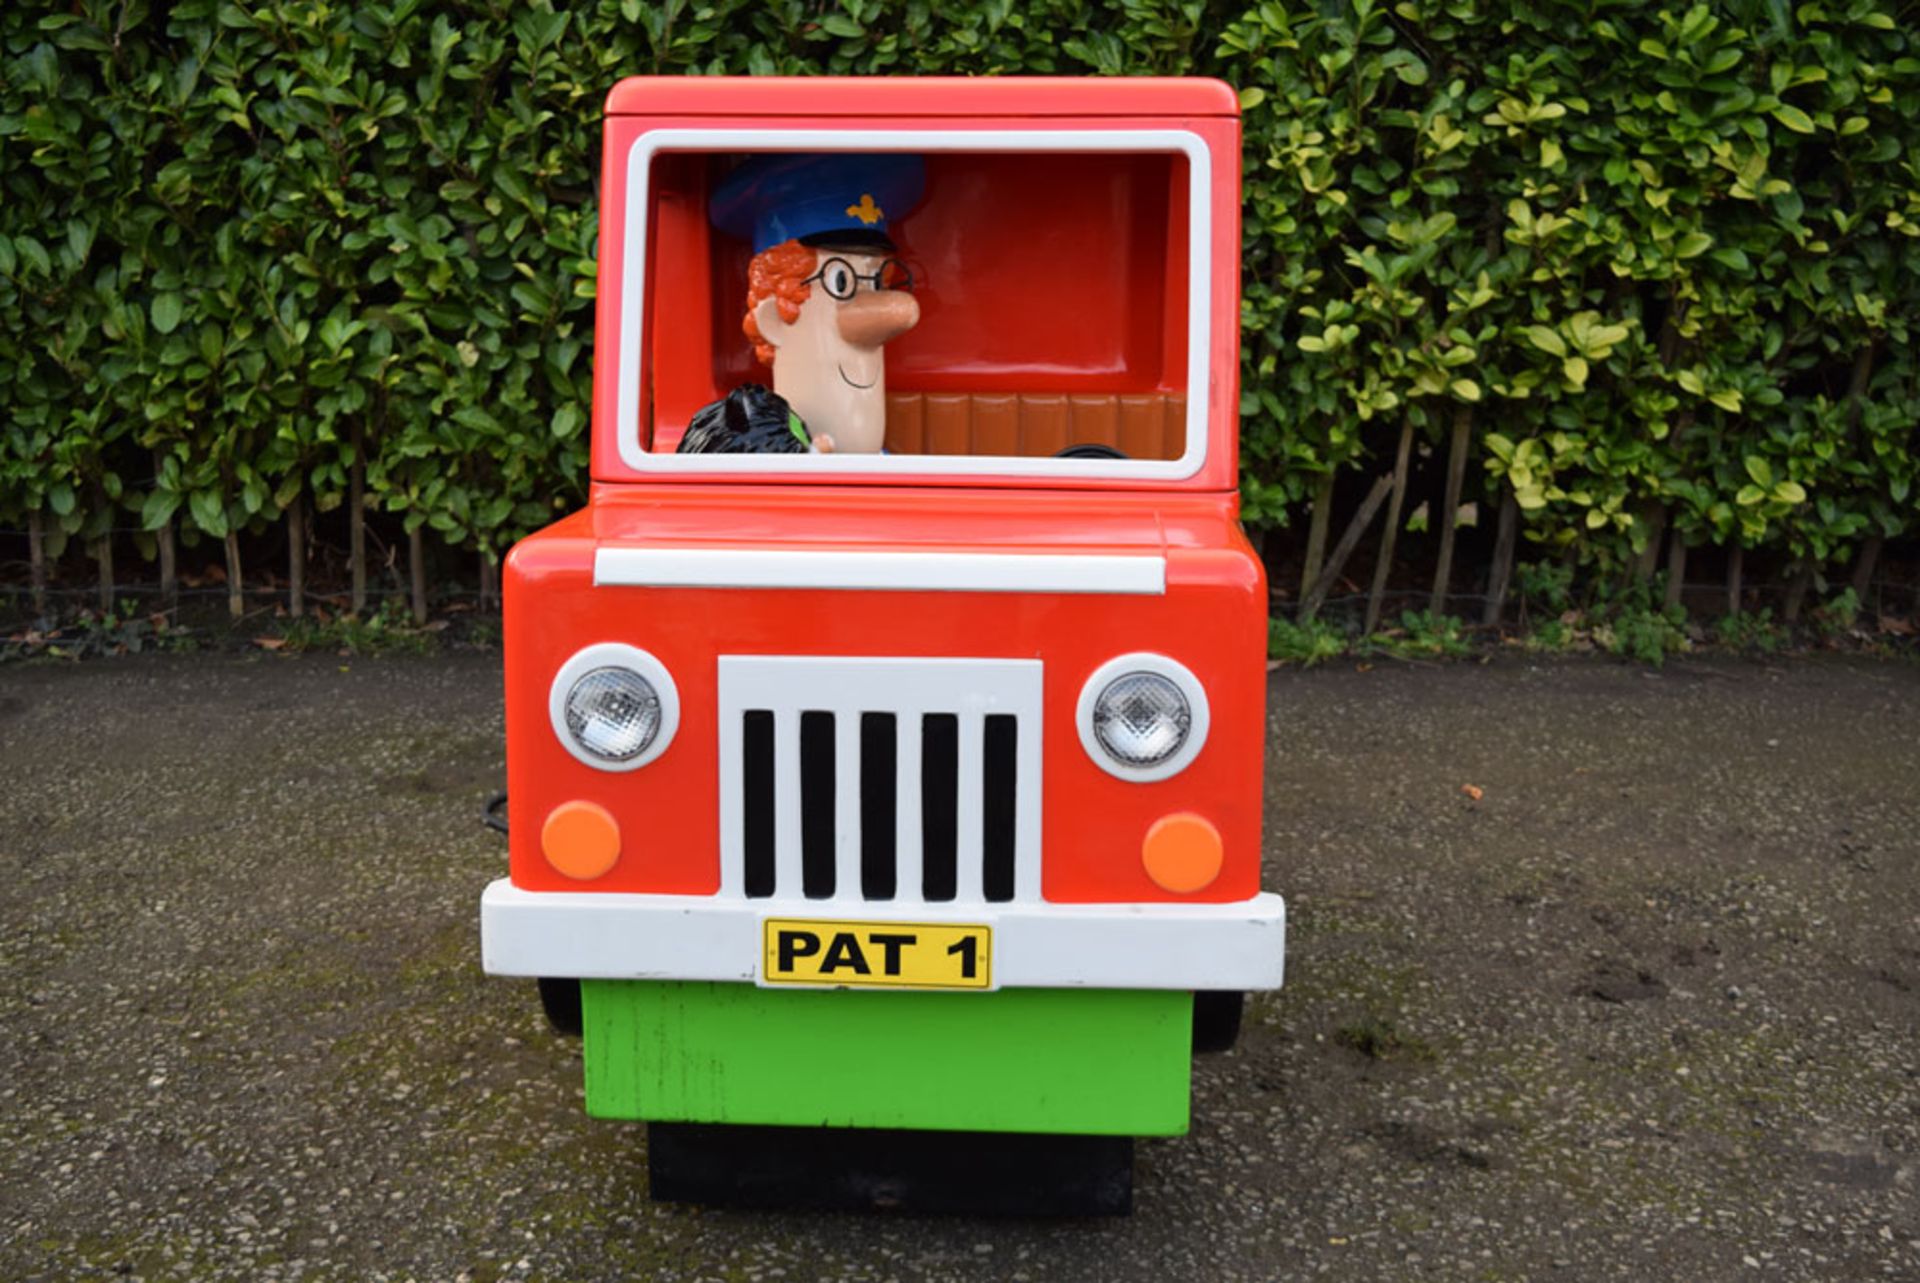 Postman Pat Child's Coin Operated Ride On Arcade Machine. - Image 3 of 6